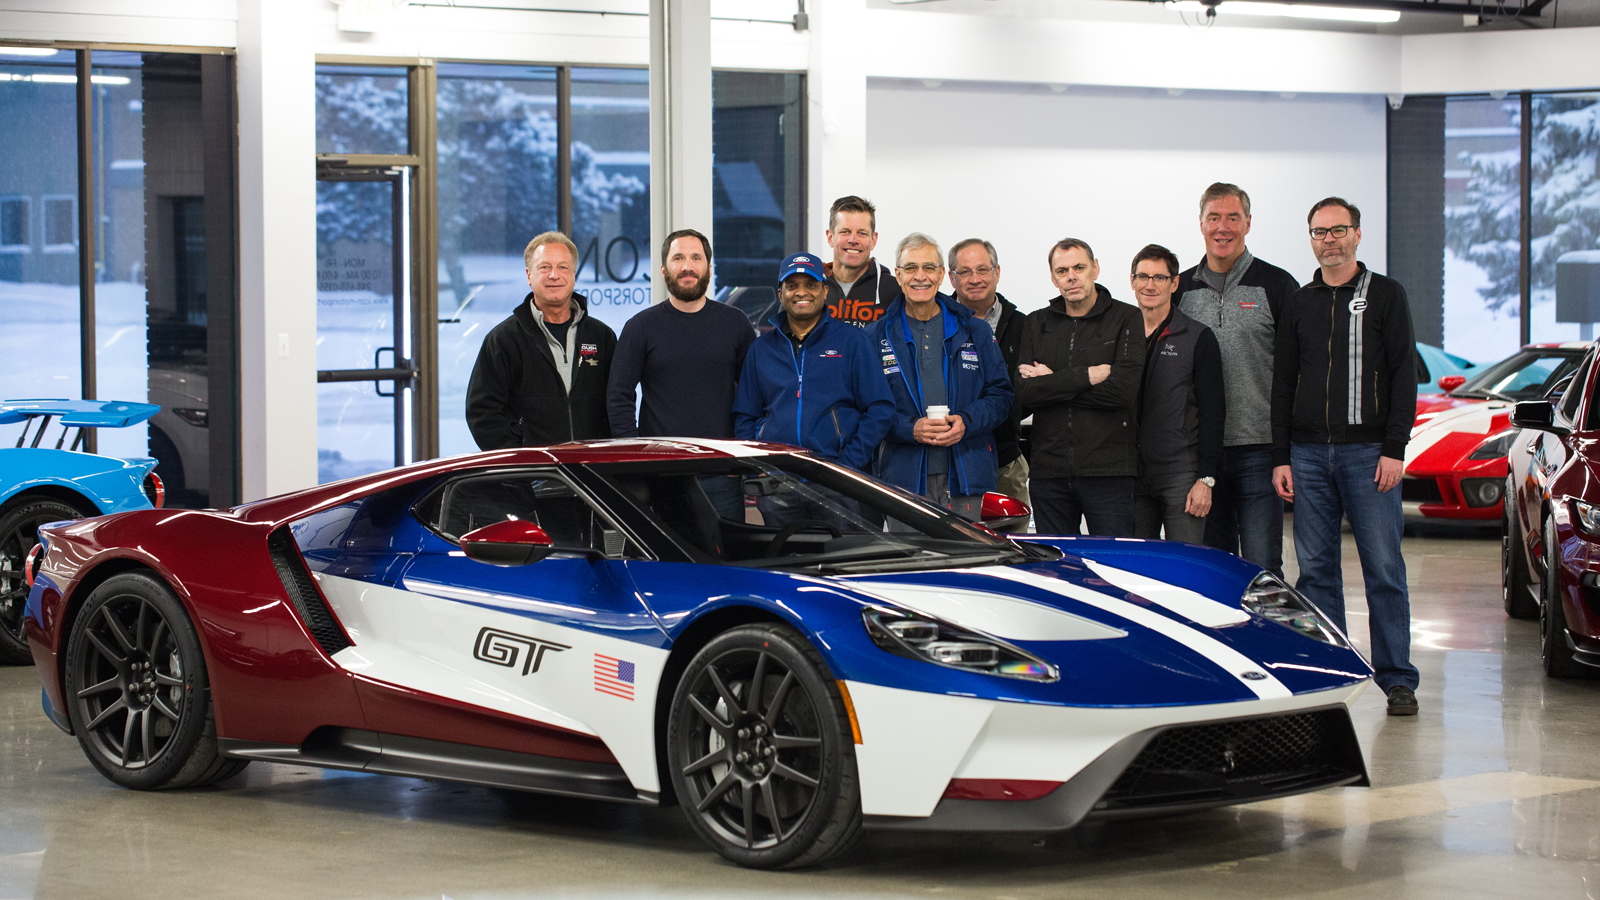 2018 Ford GT via Ford GT Forum